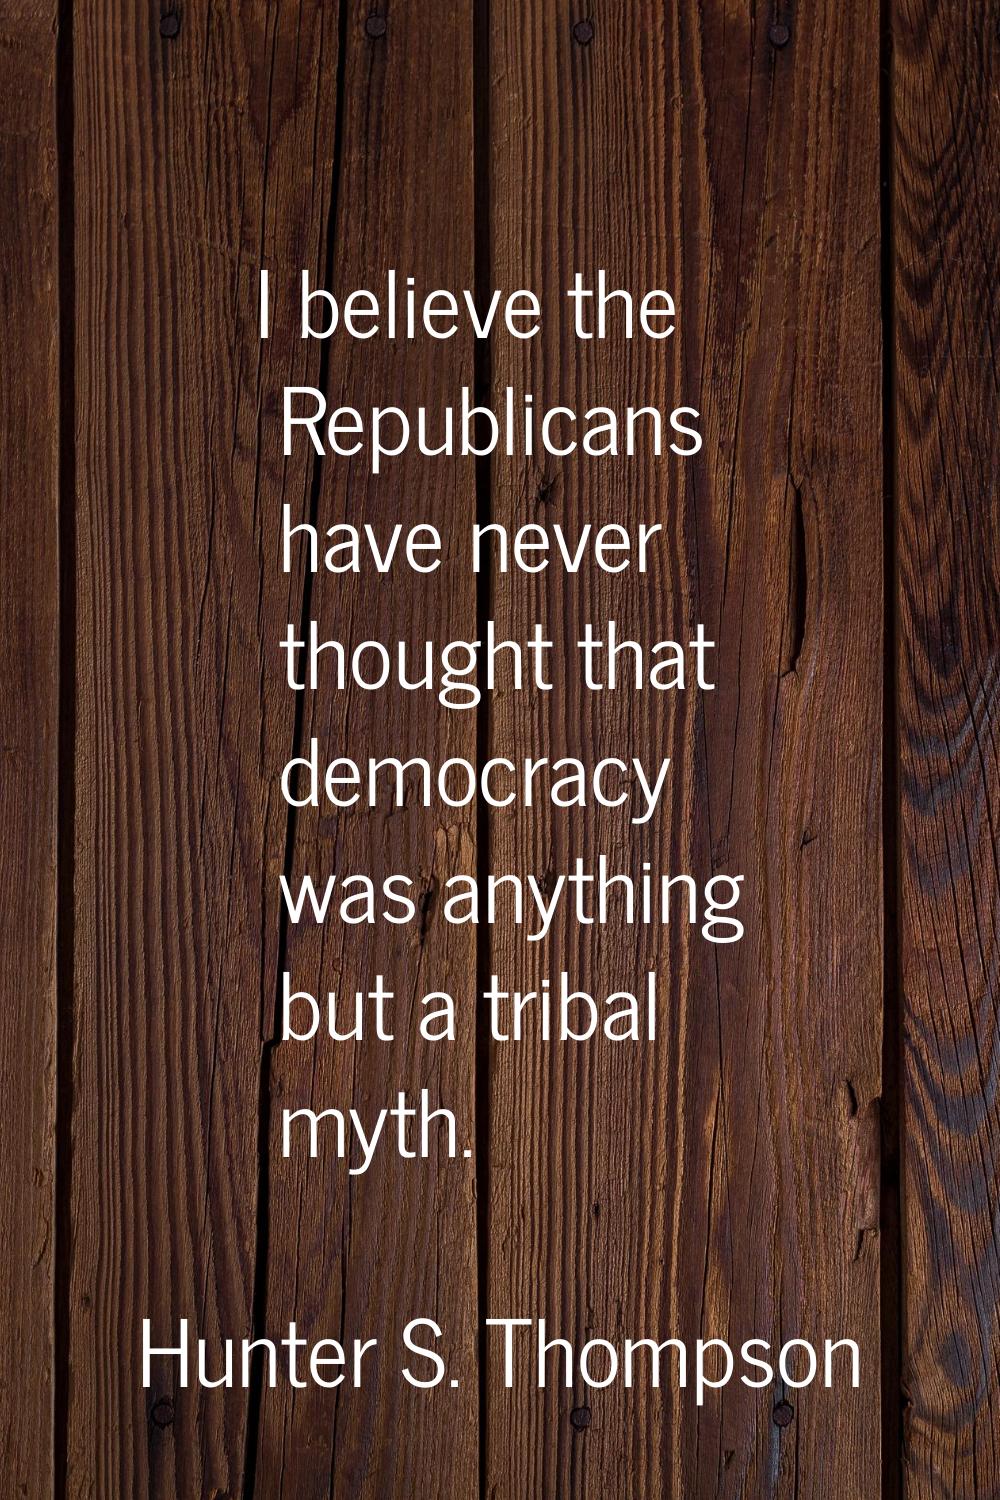 I believe the Republicans have never thought that democracy was anything but a tribal myth.